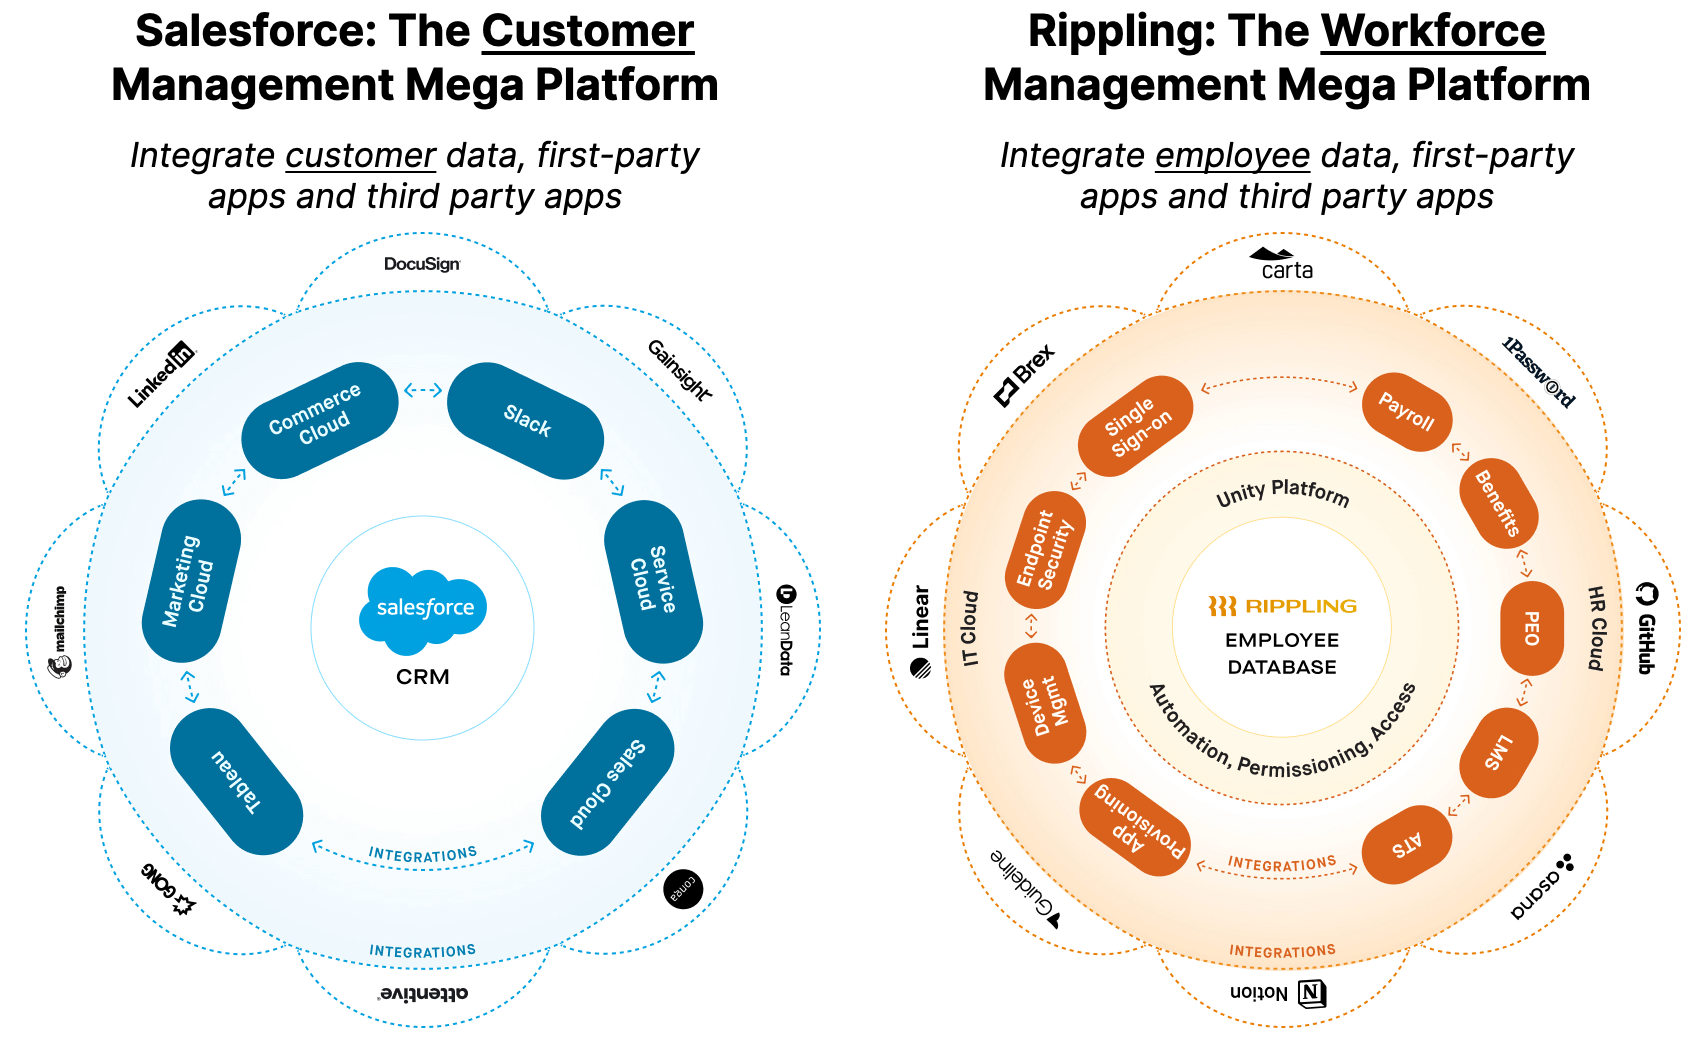 _Comparison of Salesforce and Rippling.